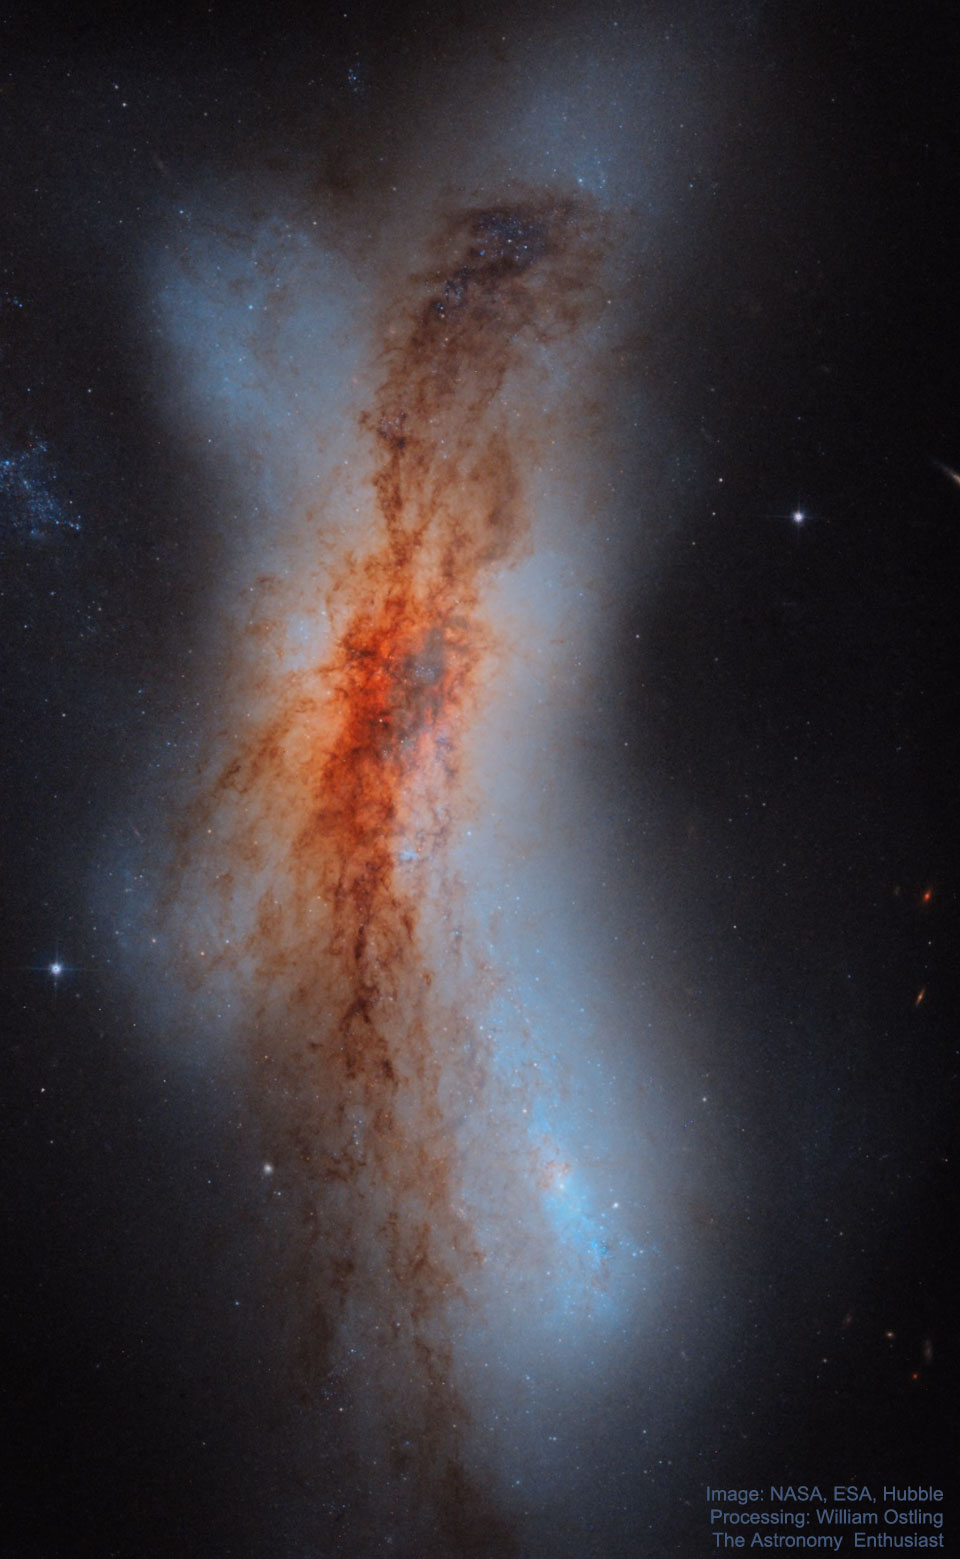 The picture shows the colliding galaxies of NGC 520
as imaged by NASA and ESA's Hubble Space Telescope.
Please see the explanation for more detailed information.